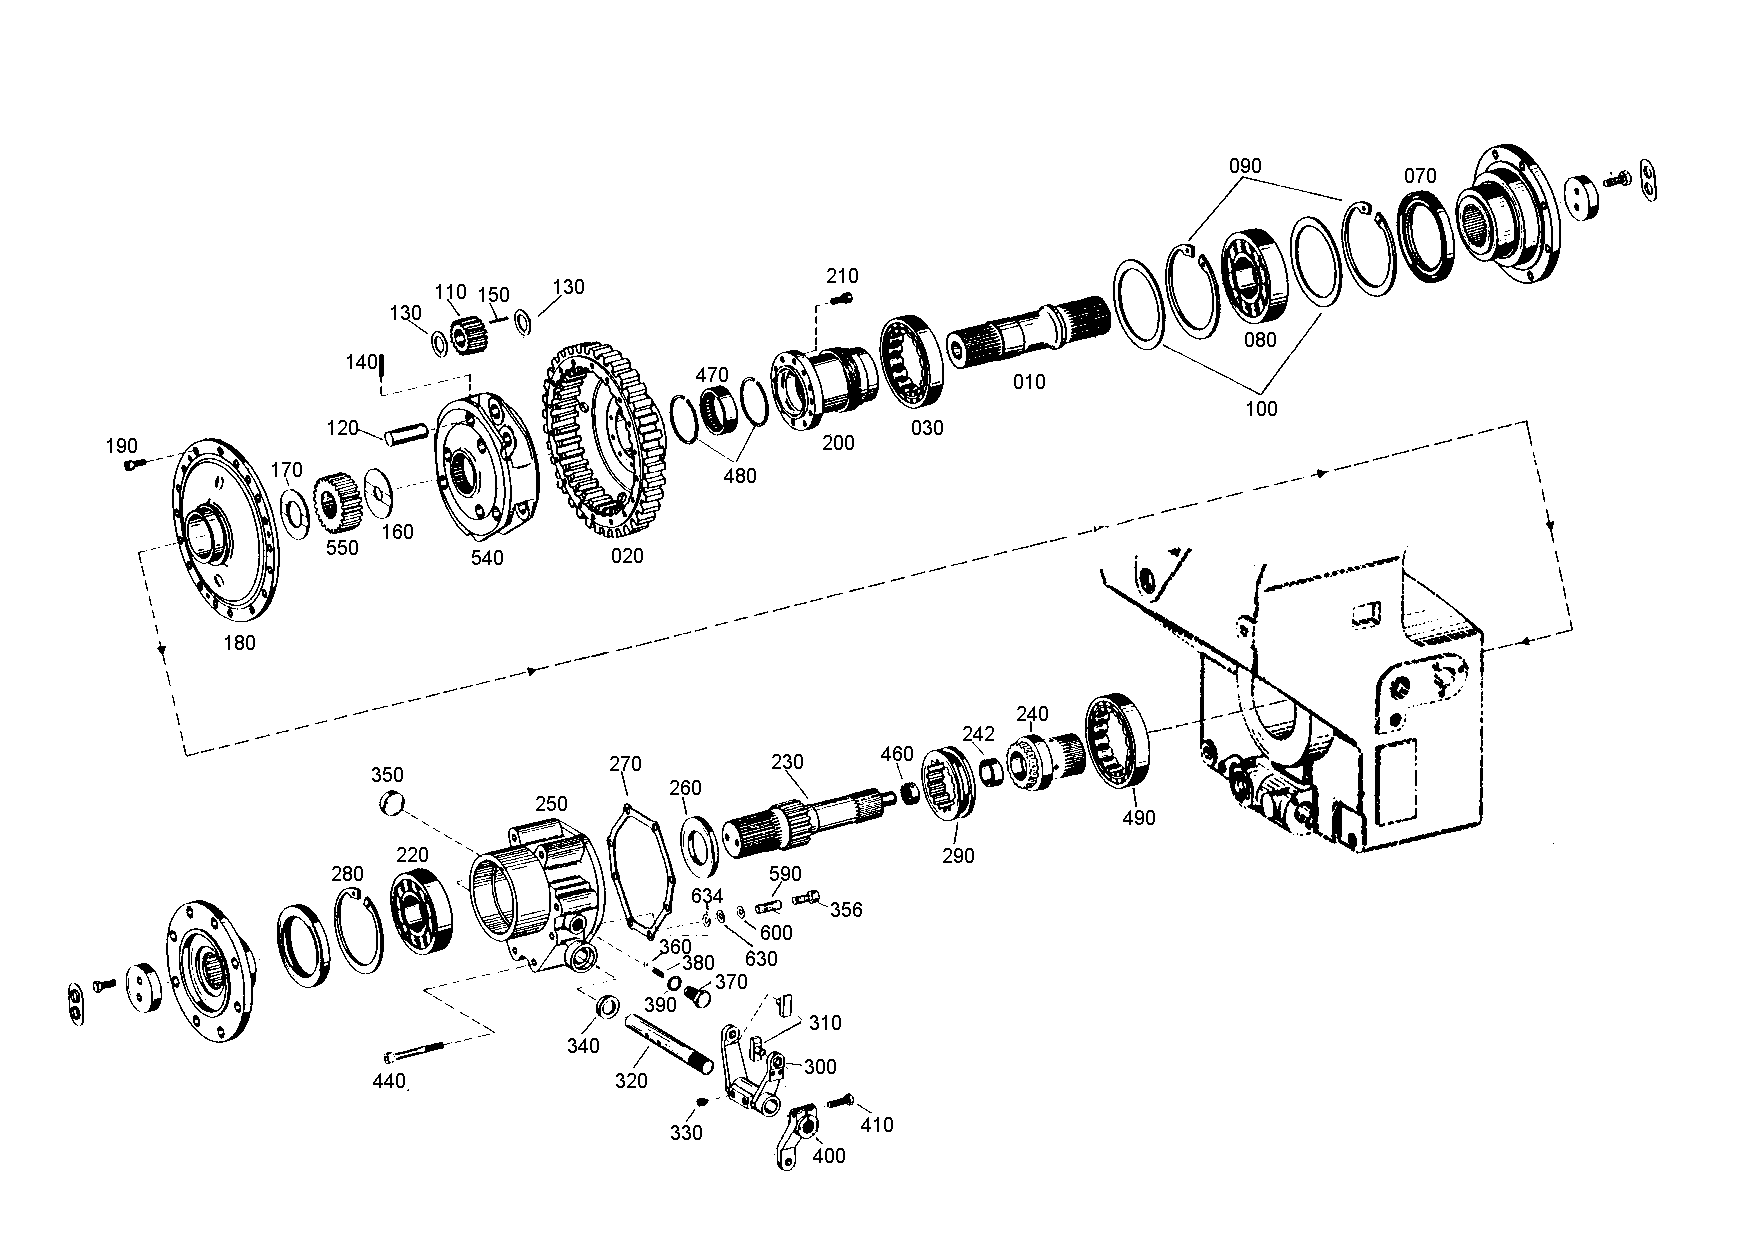 drawing for PPM 09399624 - GEAR SHIFT FORK (figure 5)